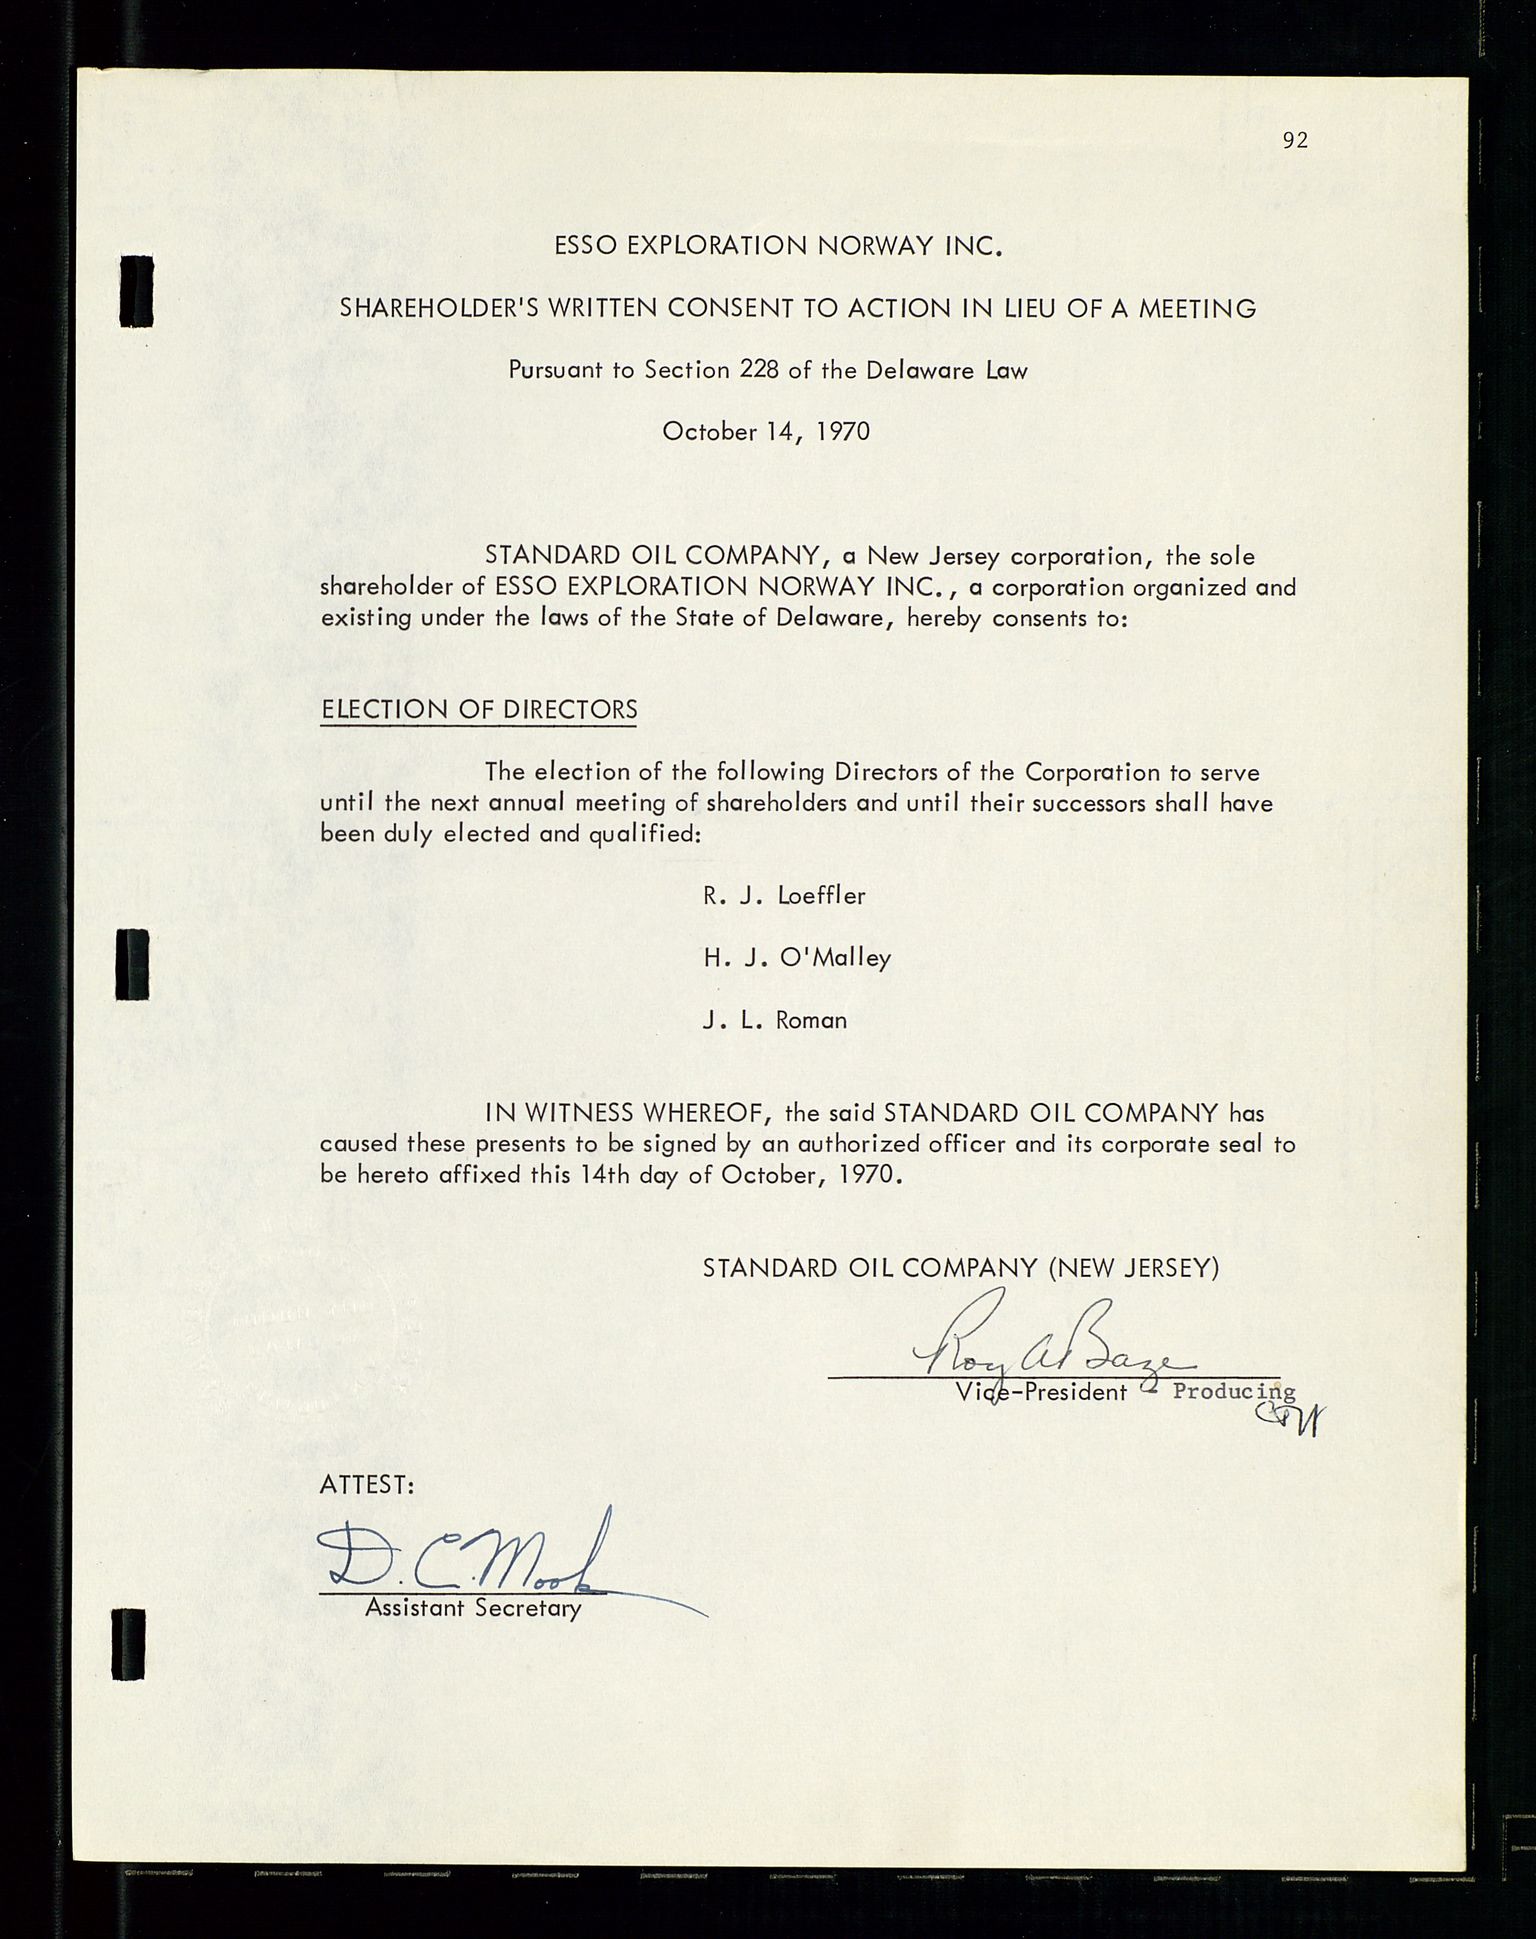 Pa 1512 - Esso Exploration and Production Norway Inc., SAST/A-101917/A/Aa/L0001/0001: Styredokumenter / Corporate records, By-Laws, Board meeting minutes, Incorporations, 1965-1975, s. 92